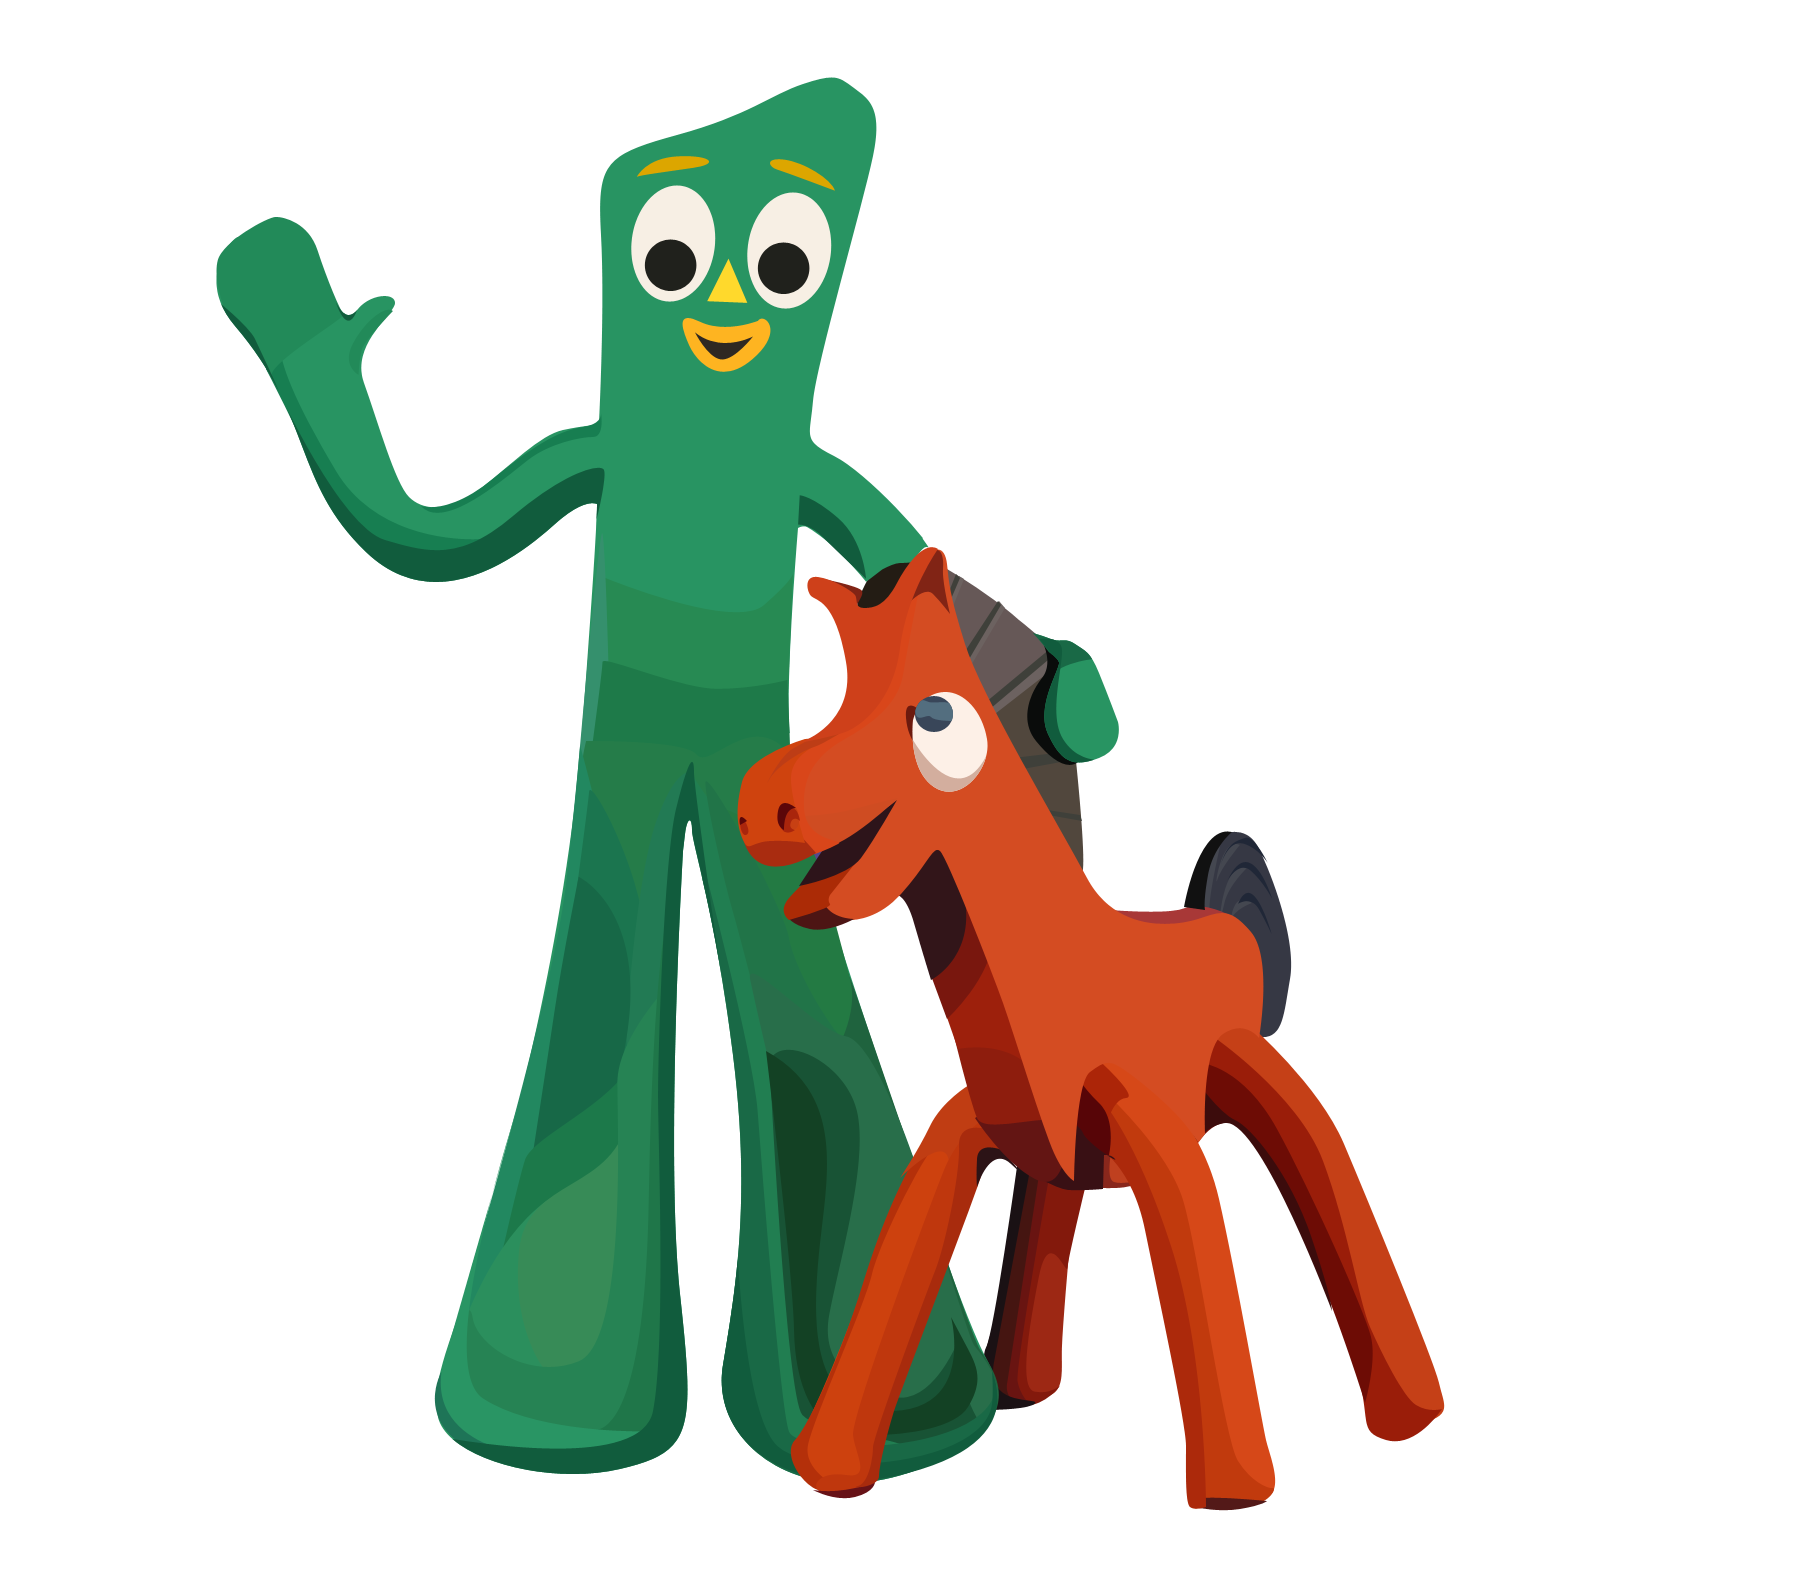 Gumby_And_Pokey_by_Crusader333.png